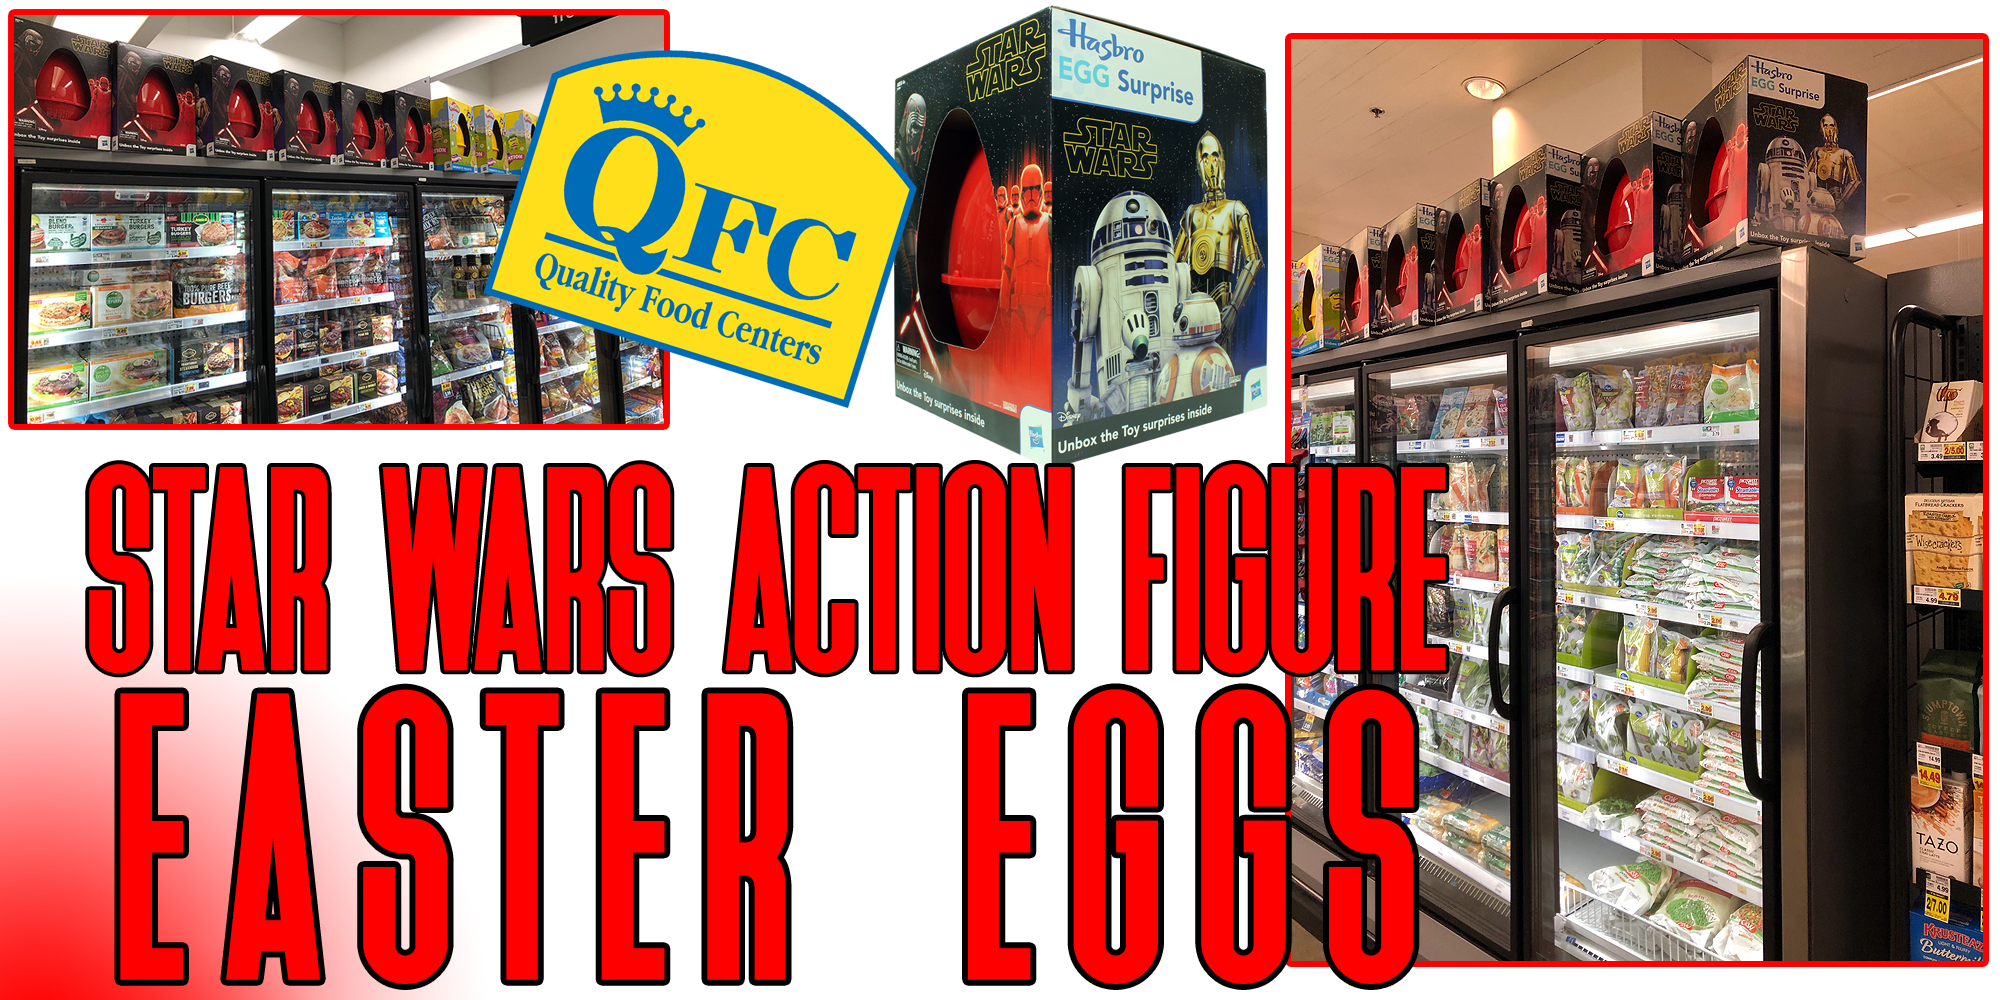 Star Wars Action Figure Easter Eggs